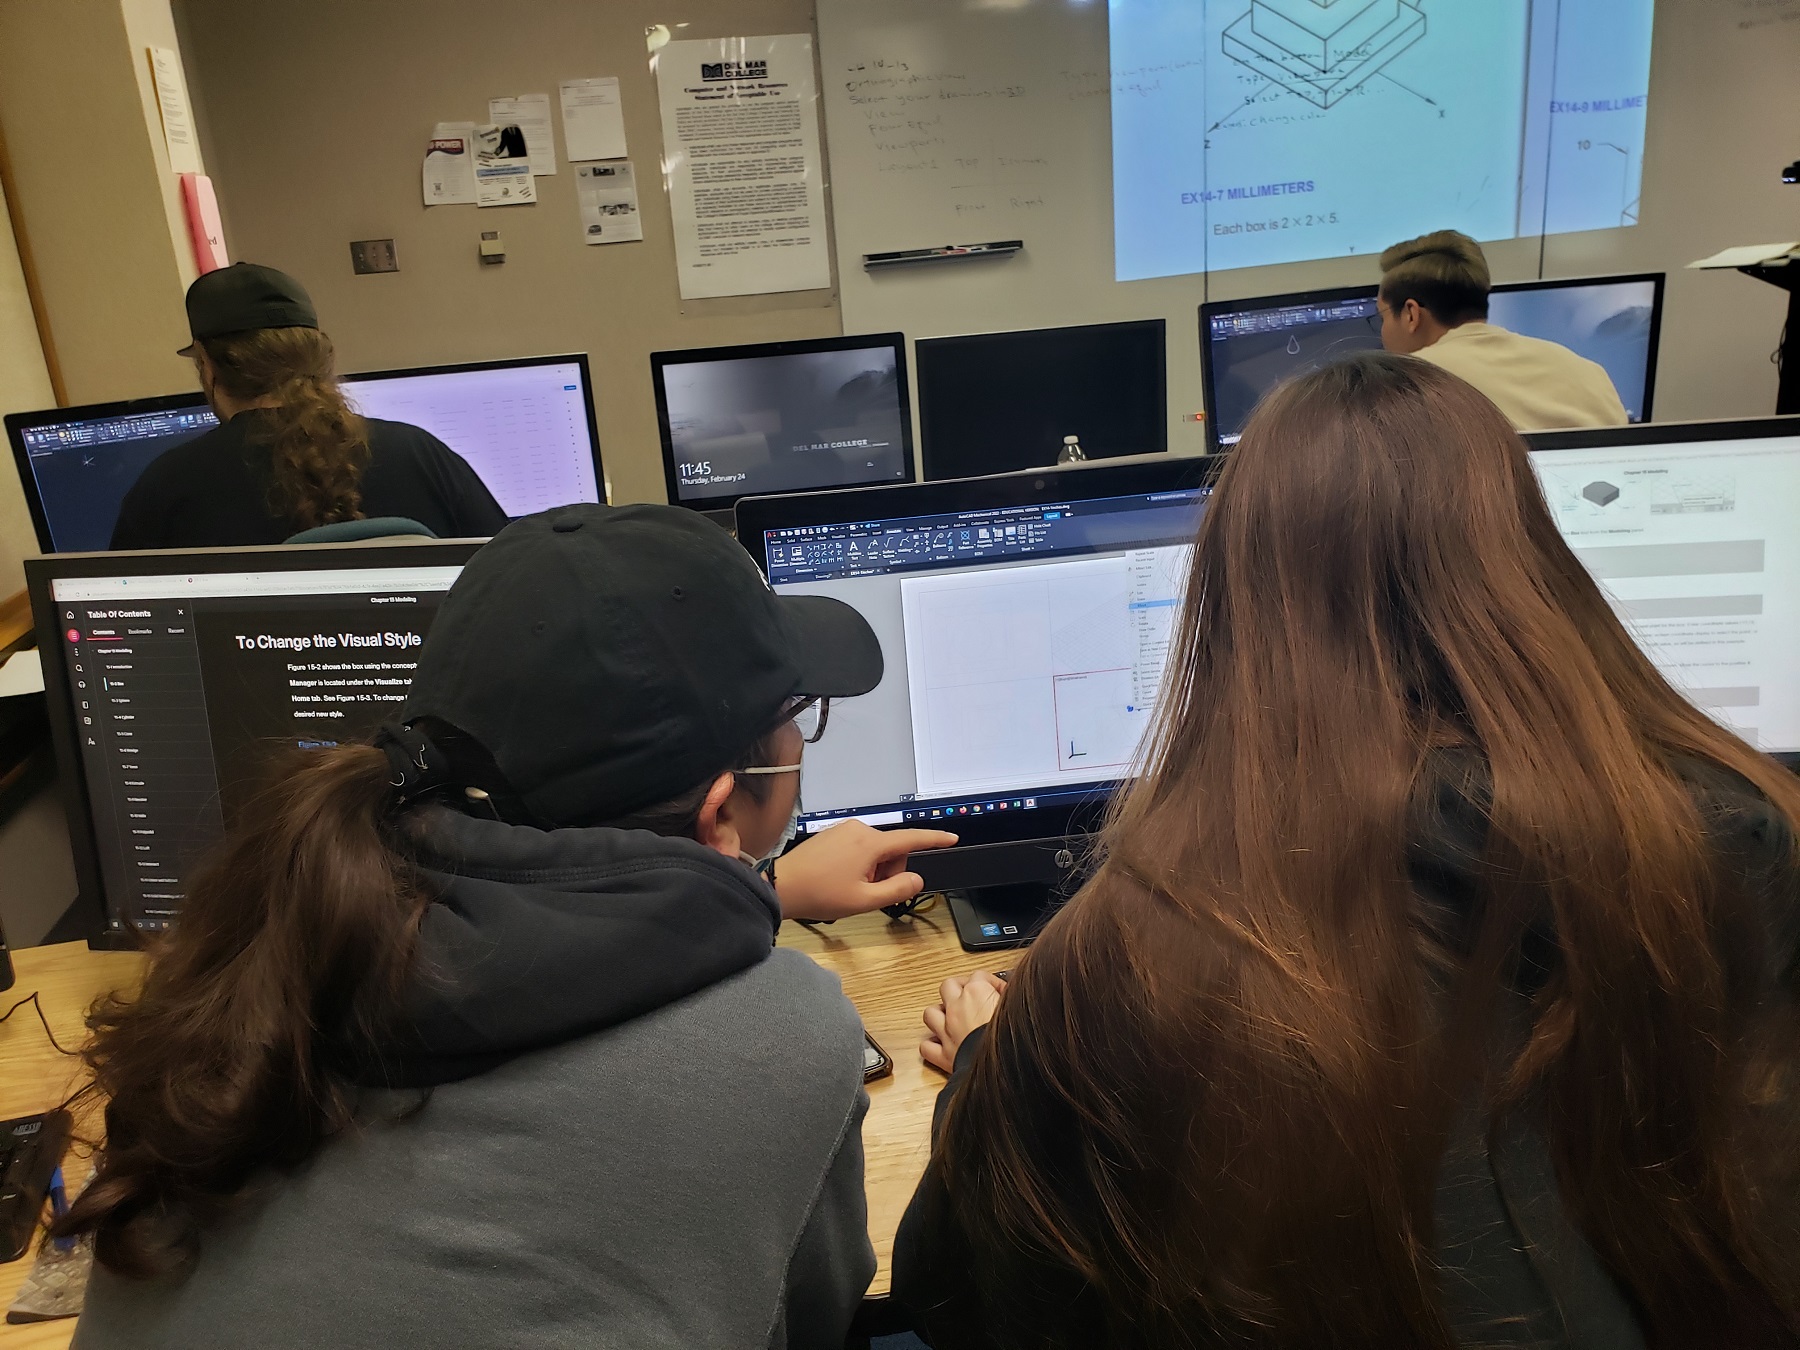 Engineering students working on a computer together.